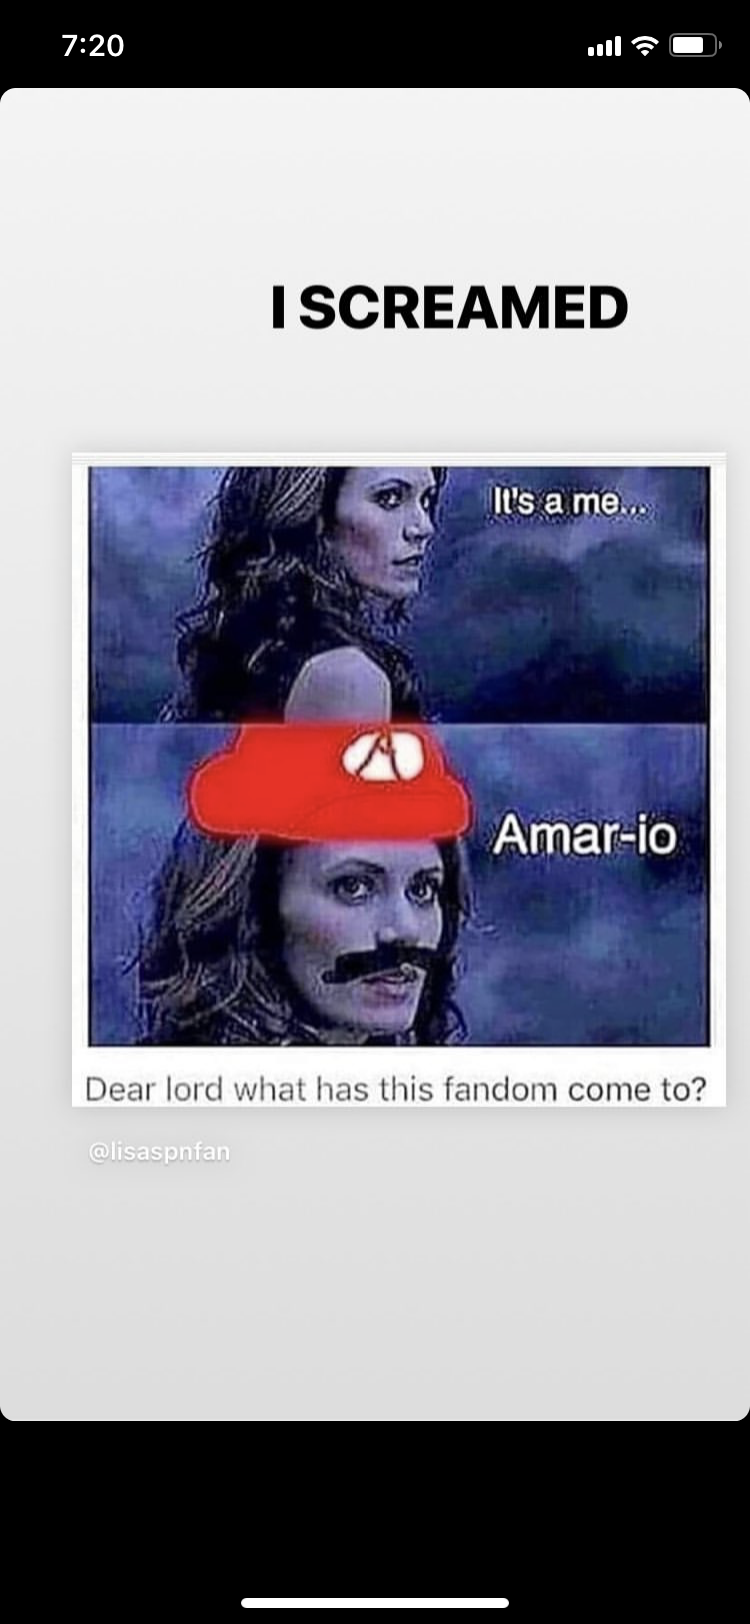 video - Iscreamed It's a me... Amario Dear lord what has this fandom come to?